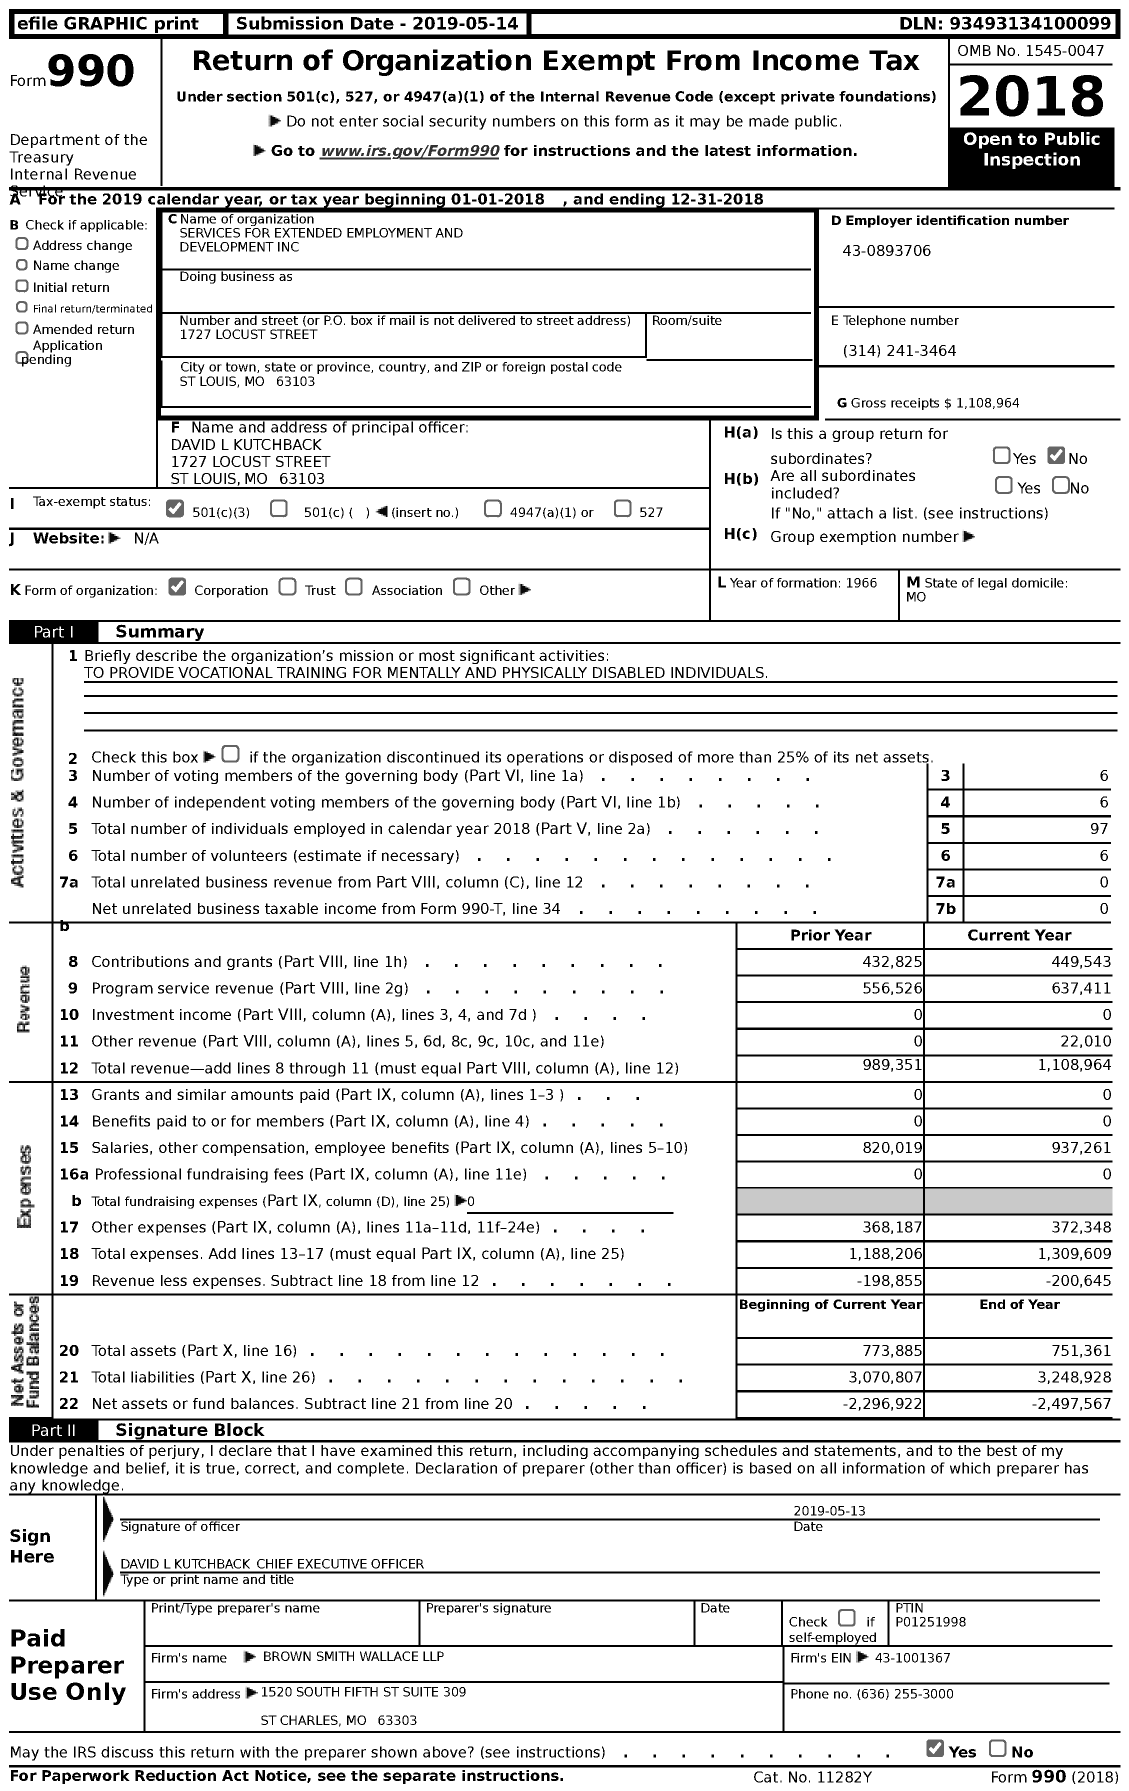 Image of first page of 2018 Form 990 for Services for Extended Employment and Development